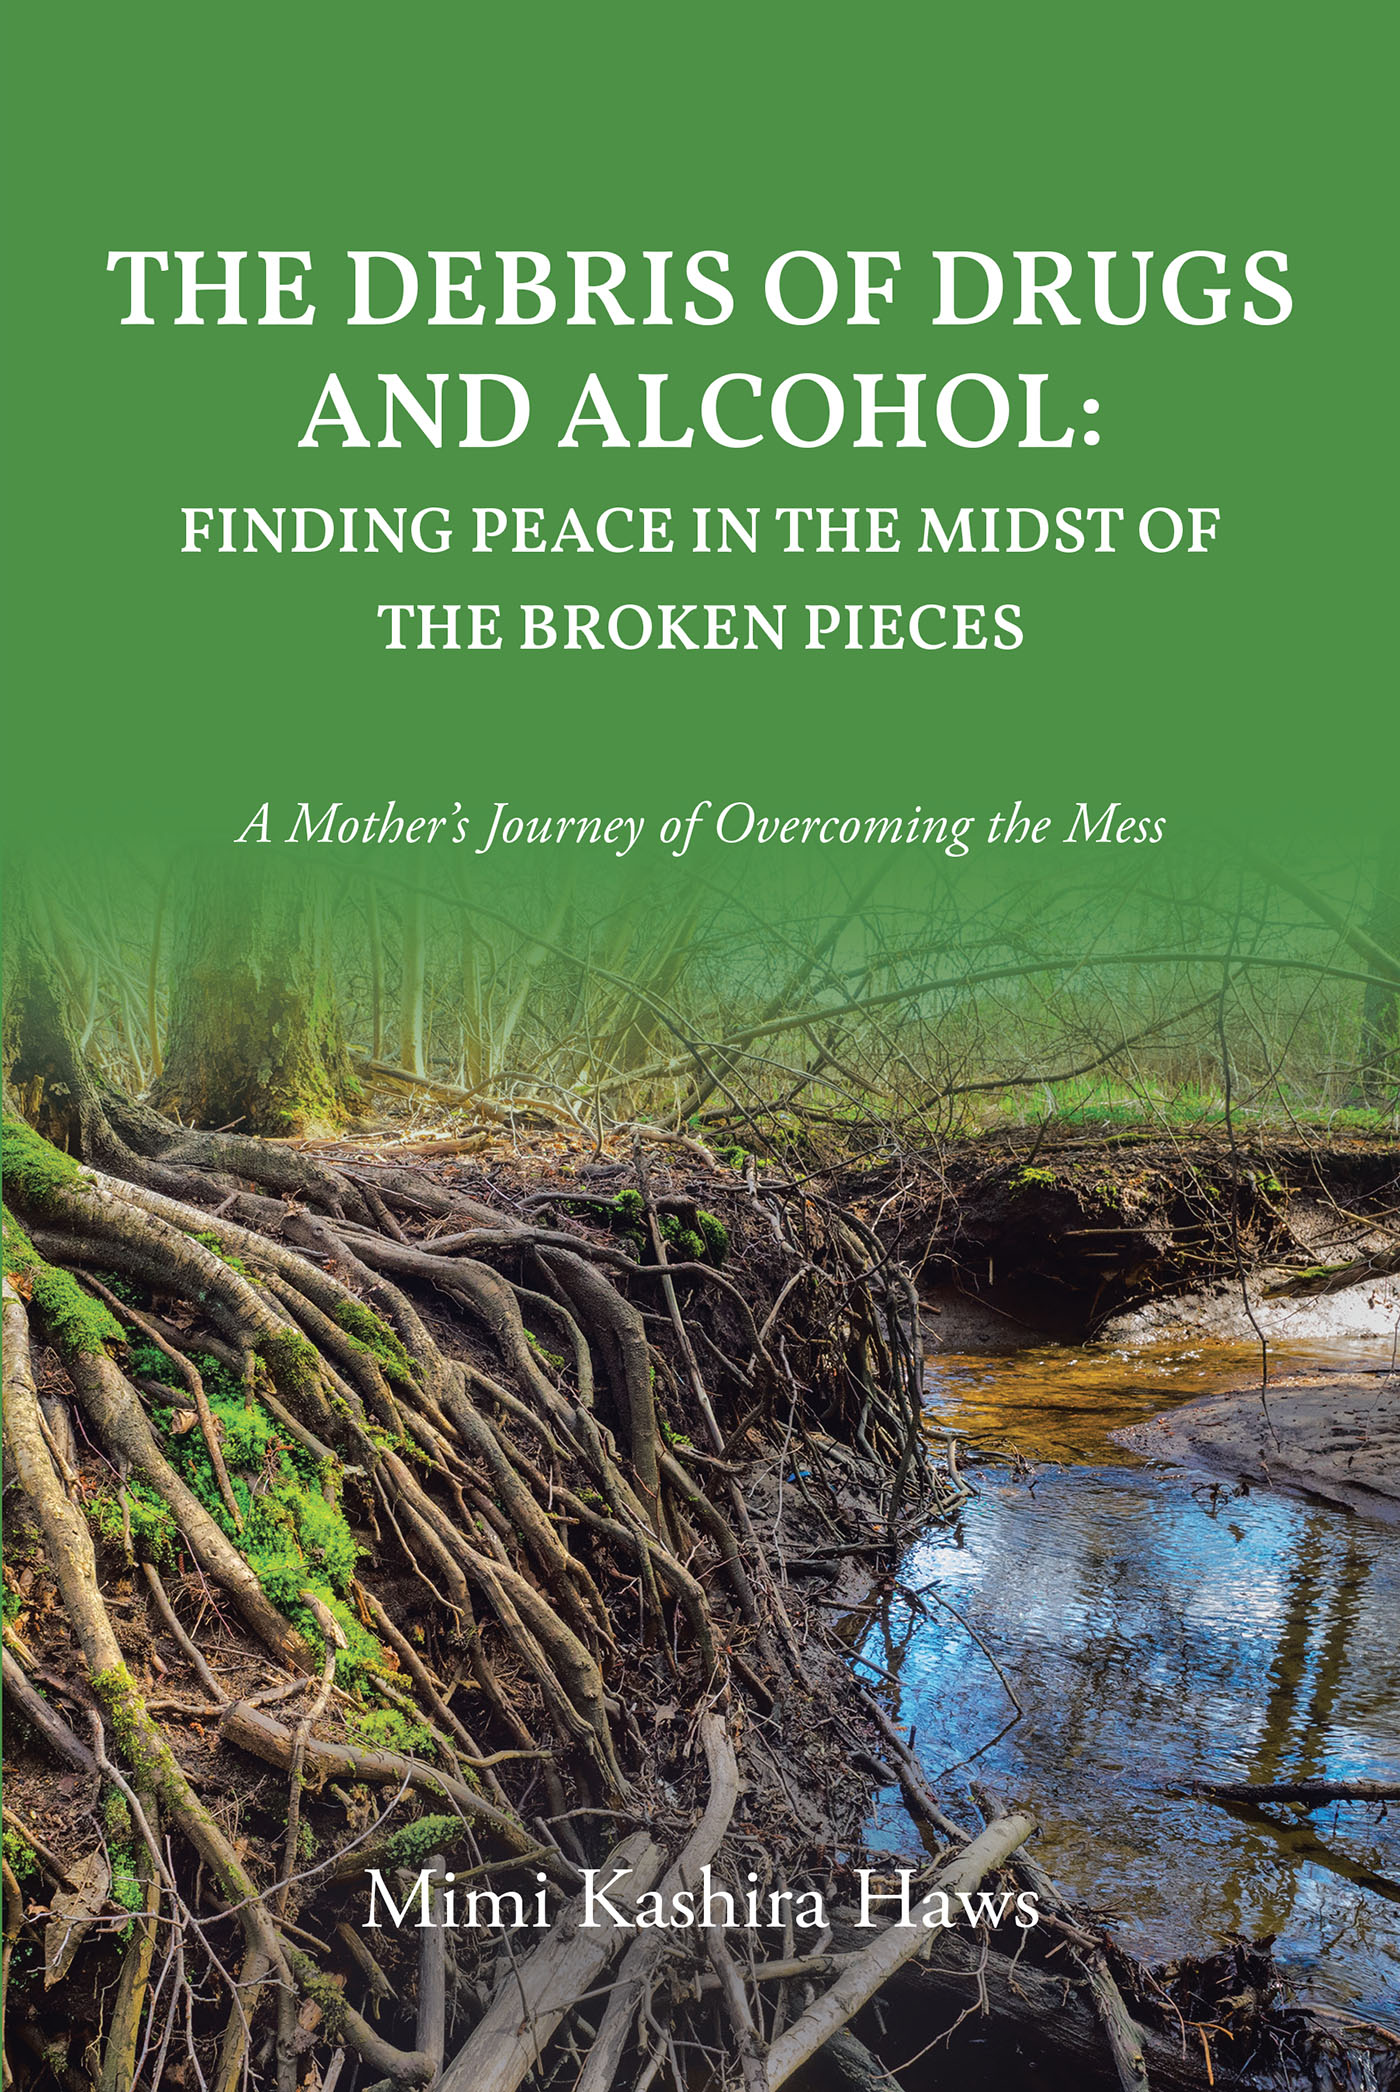 Mimi Kashira Haws’s Newly Released “The Debris of Drugs and Alcohol: Finding Peace in the Midst of the Broken Pieces” is a Powerful Account of a Mother’s Journey